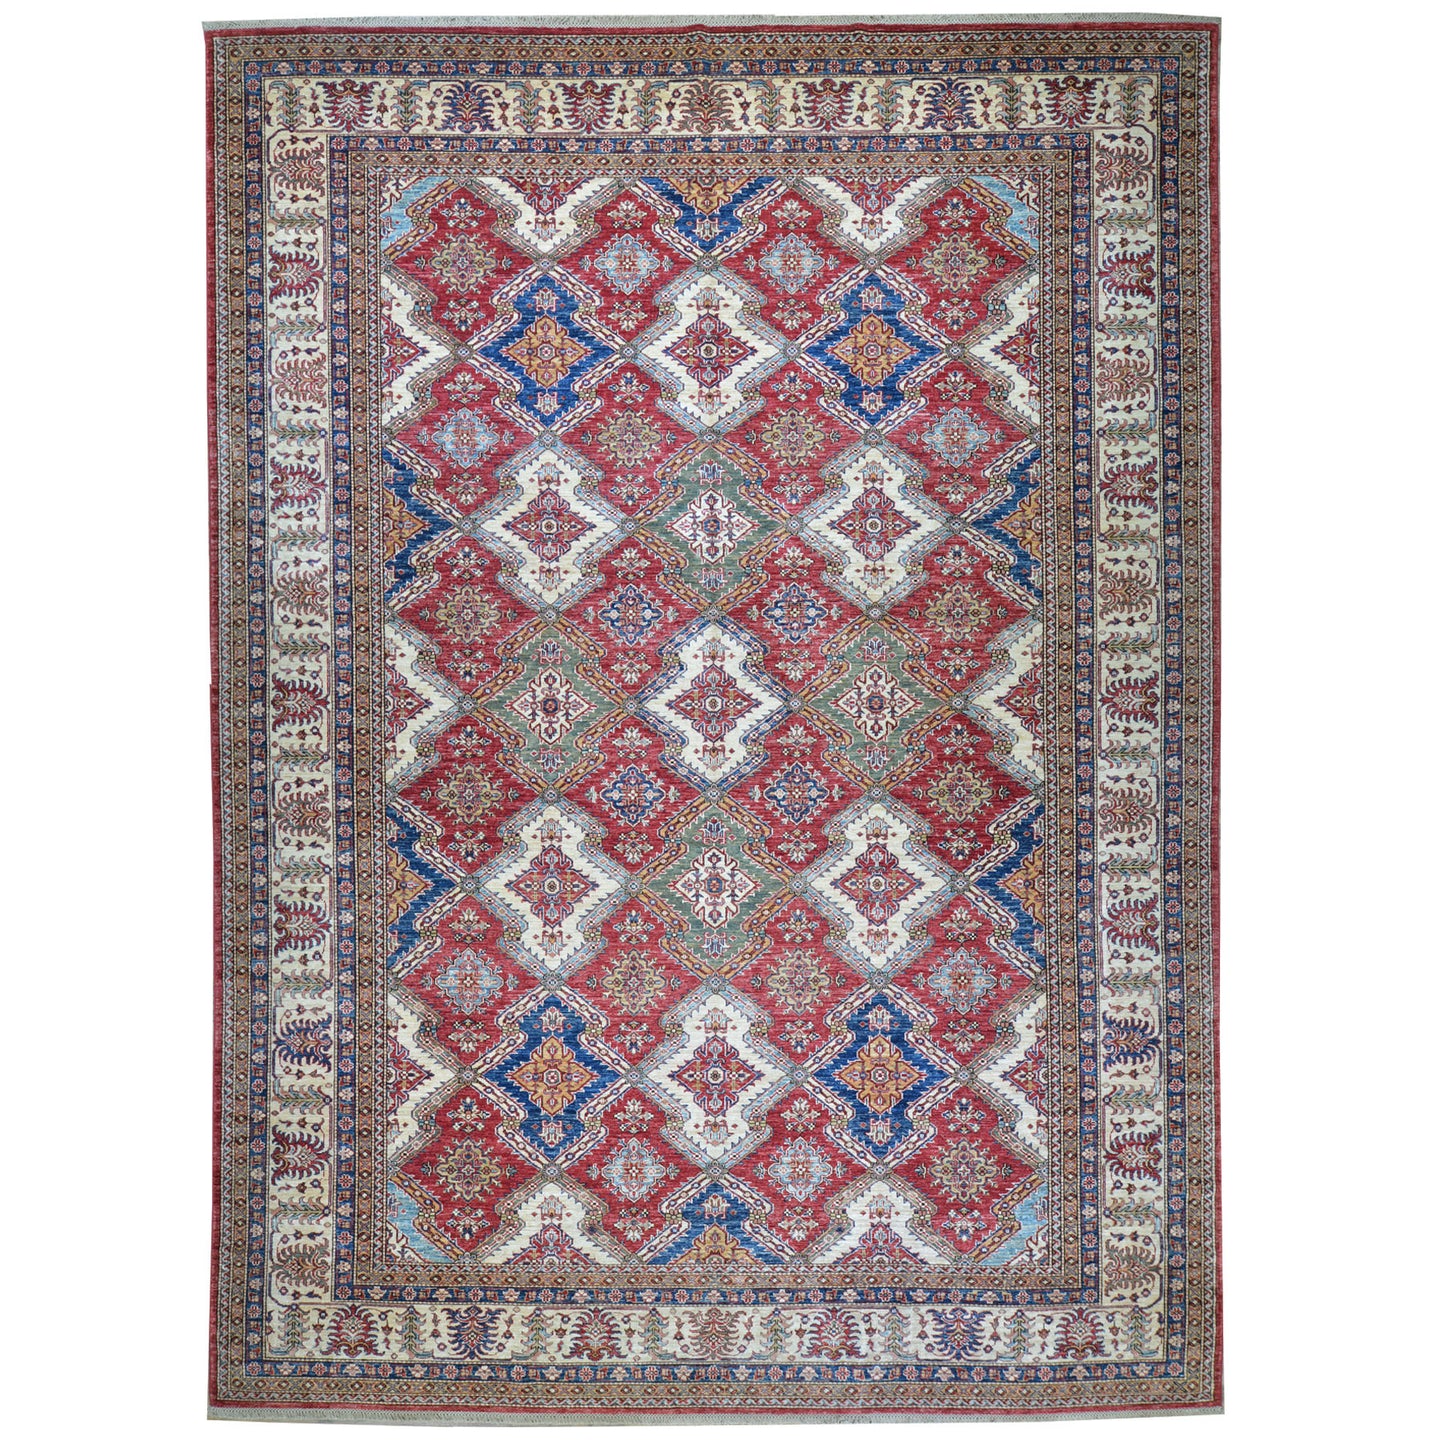 Oriental rugs, hand-knotted carpets, sustainable rugs, classic world oriental rugs, handmade, United States, interior design,  Brral-5568